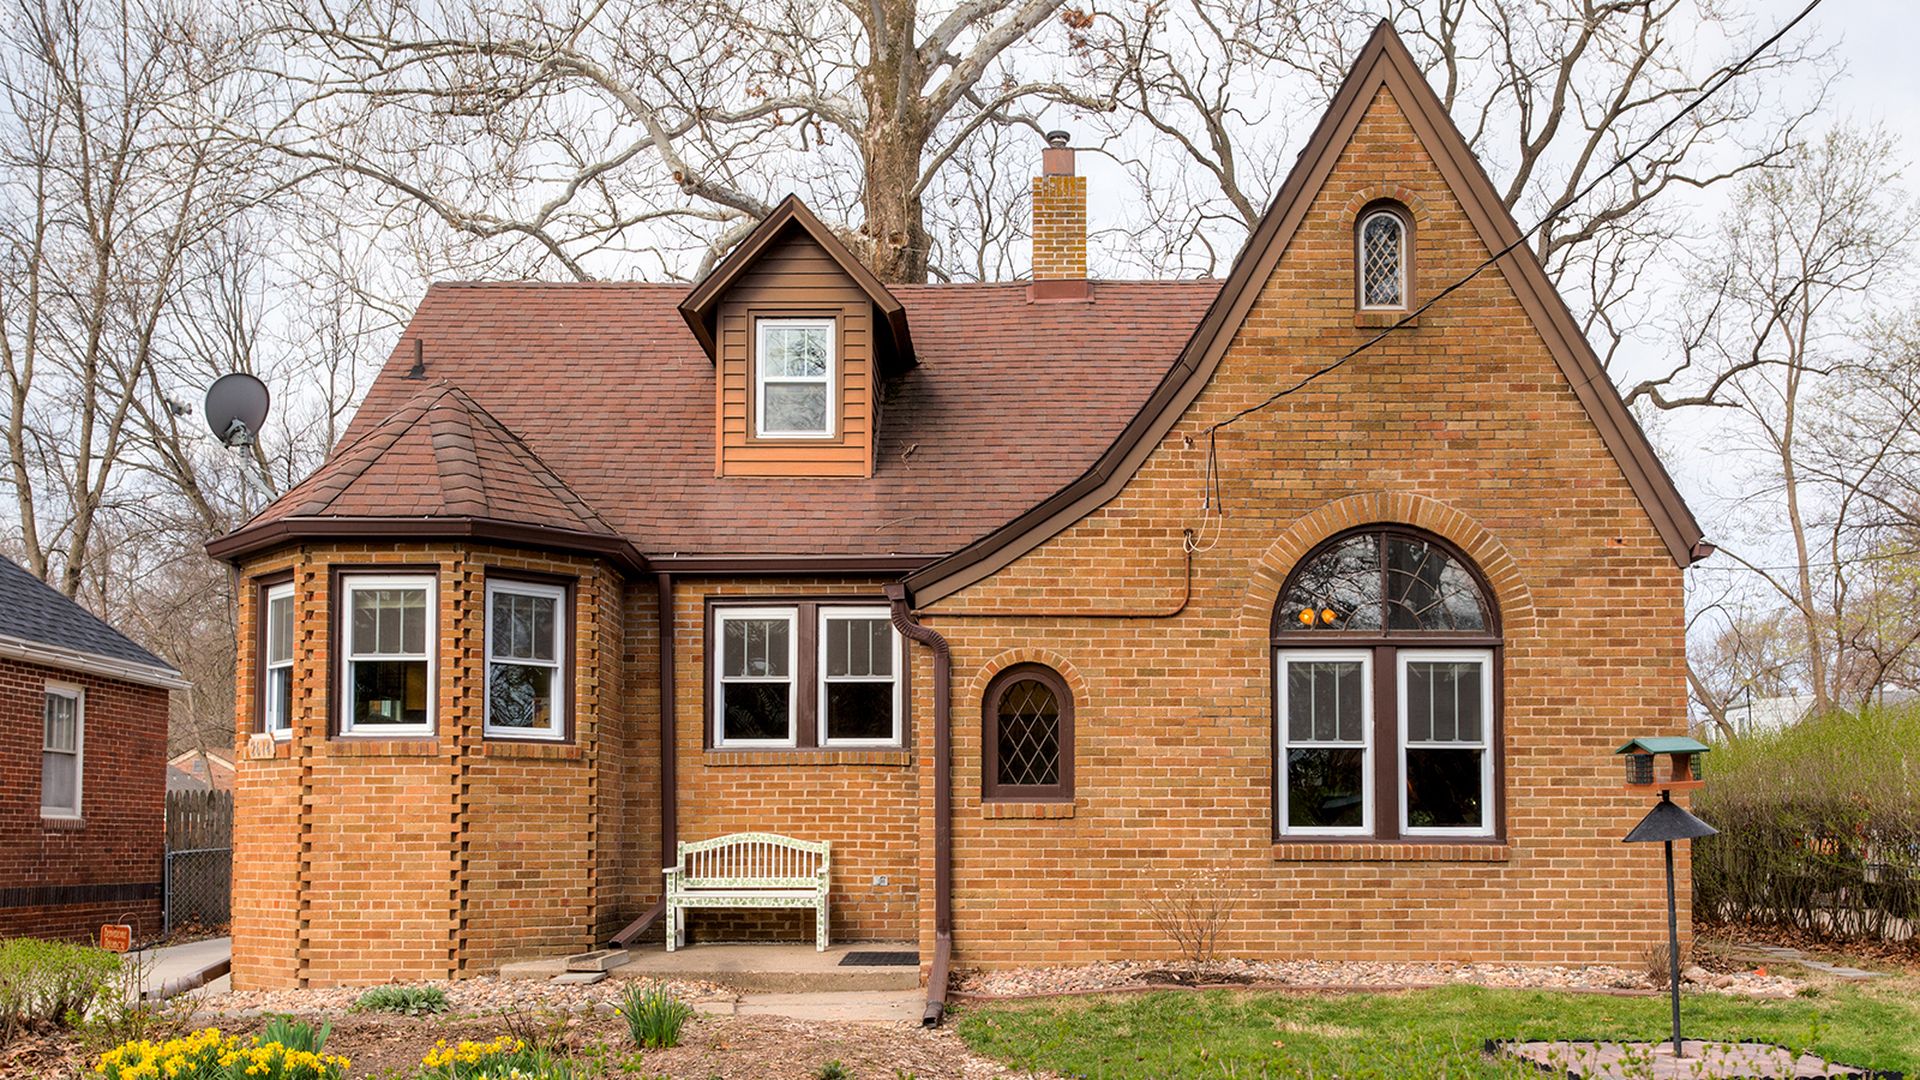 A Beaverdale home up for sale.